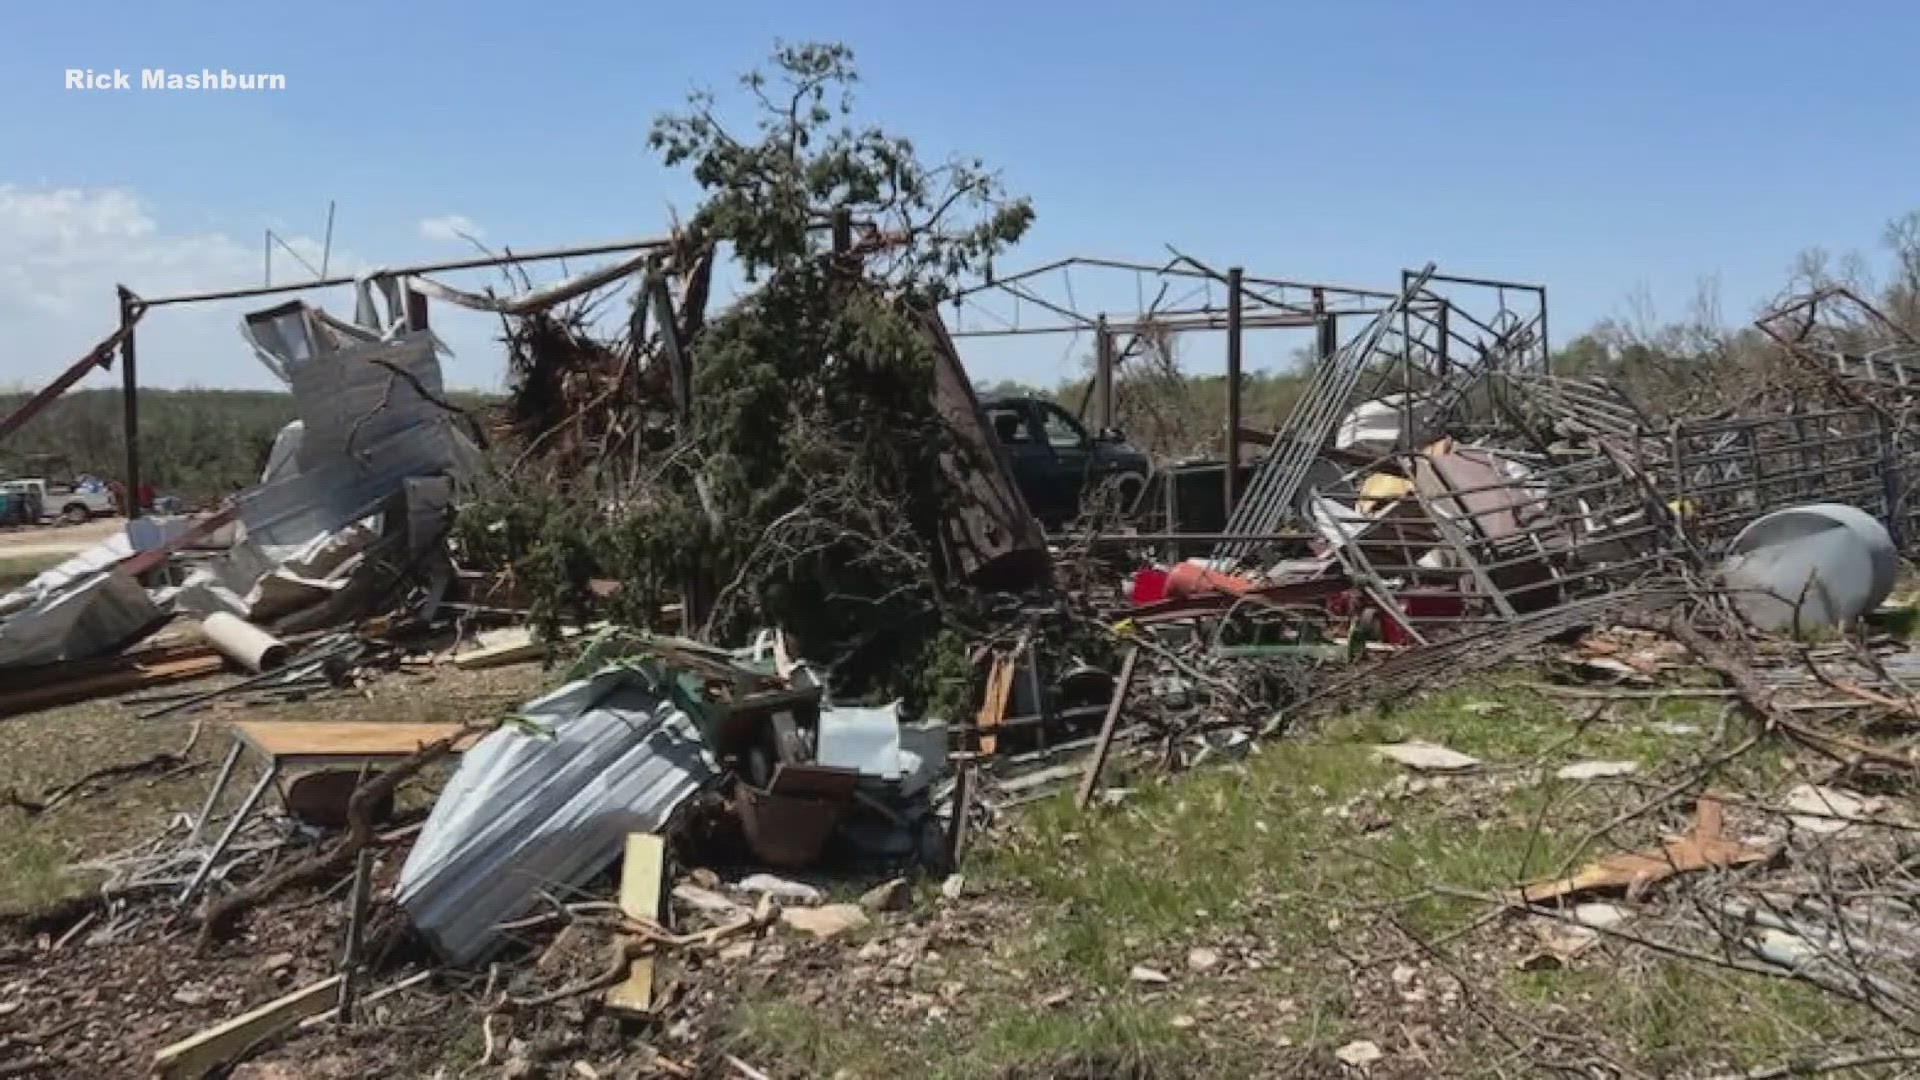 On Tuesday, April 12, 2022, an EF-3 tornado made its way through the village of Salado destroying 61 homes and two churches. One year later, residents reflect.